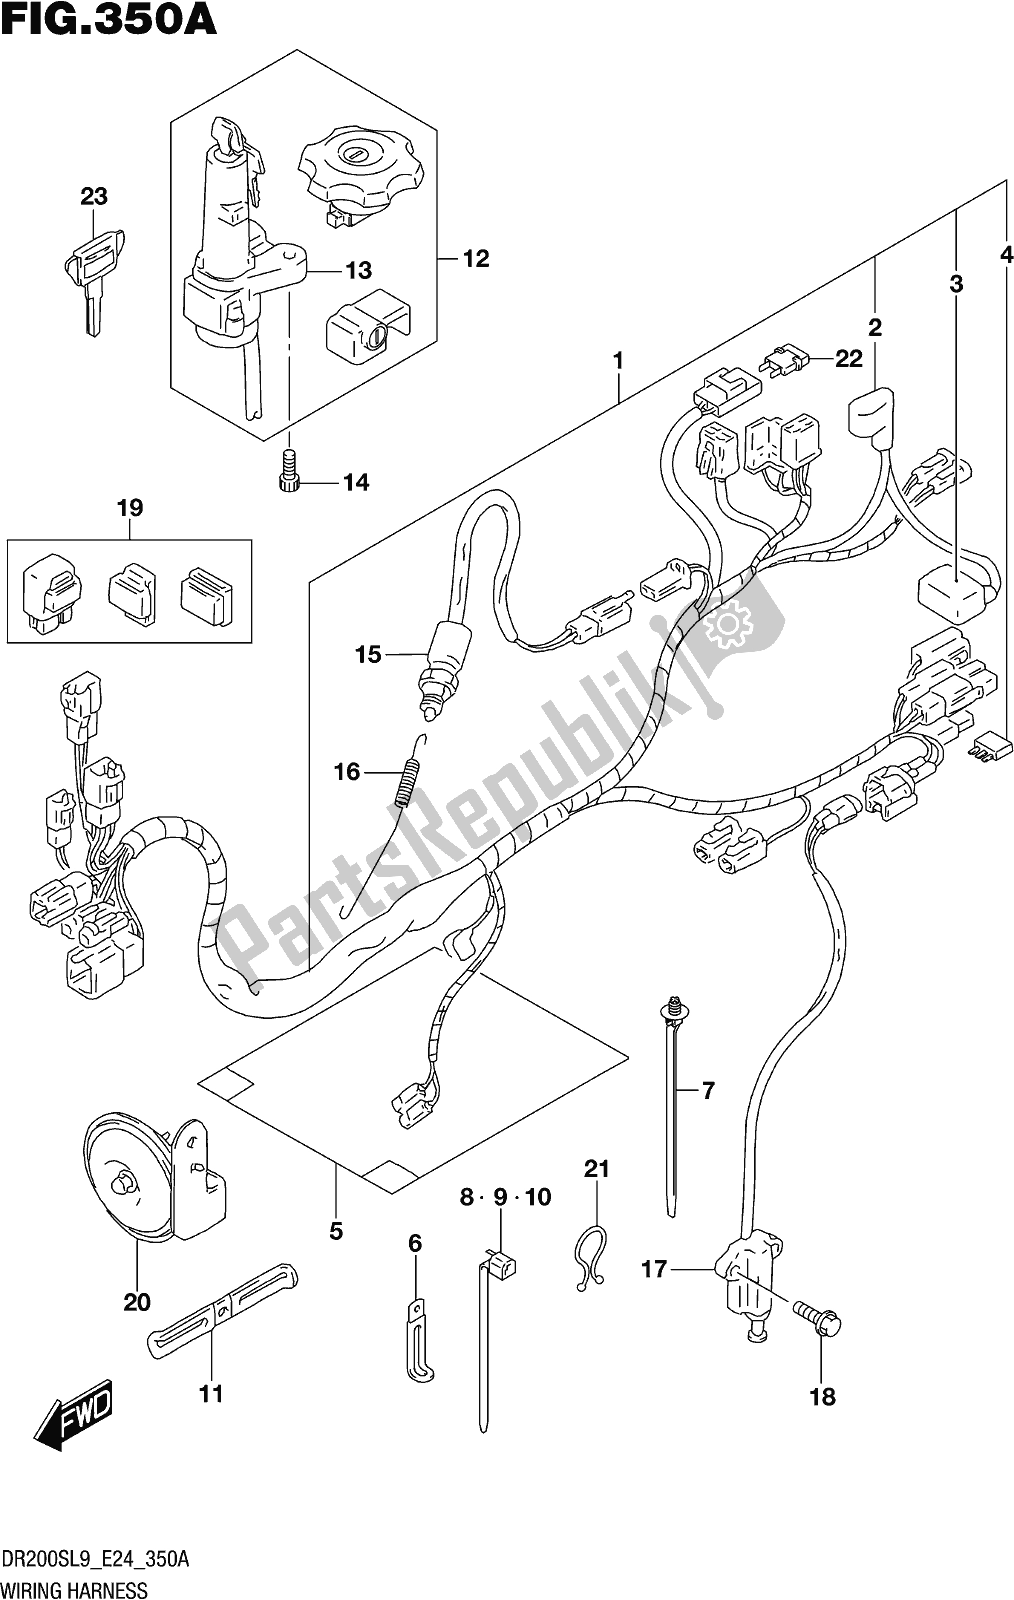 All parts for the Fig. 350a Wiring Harness of the Suzuki DR 200S 2019